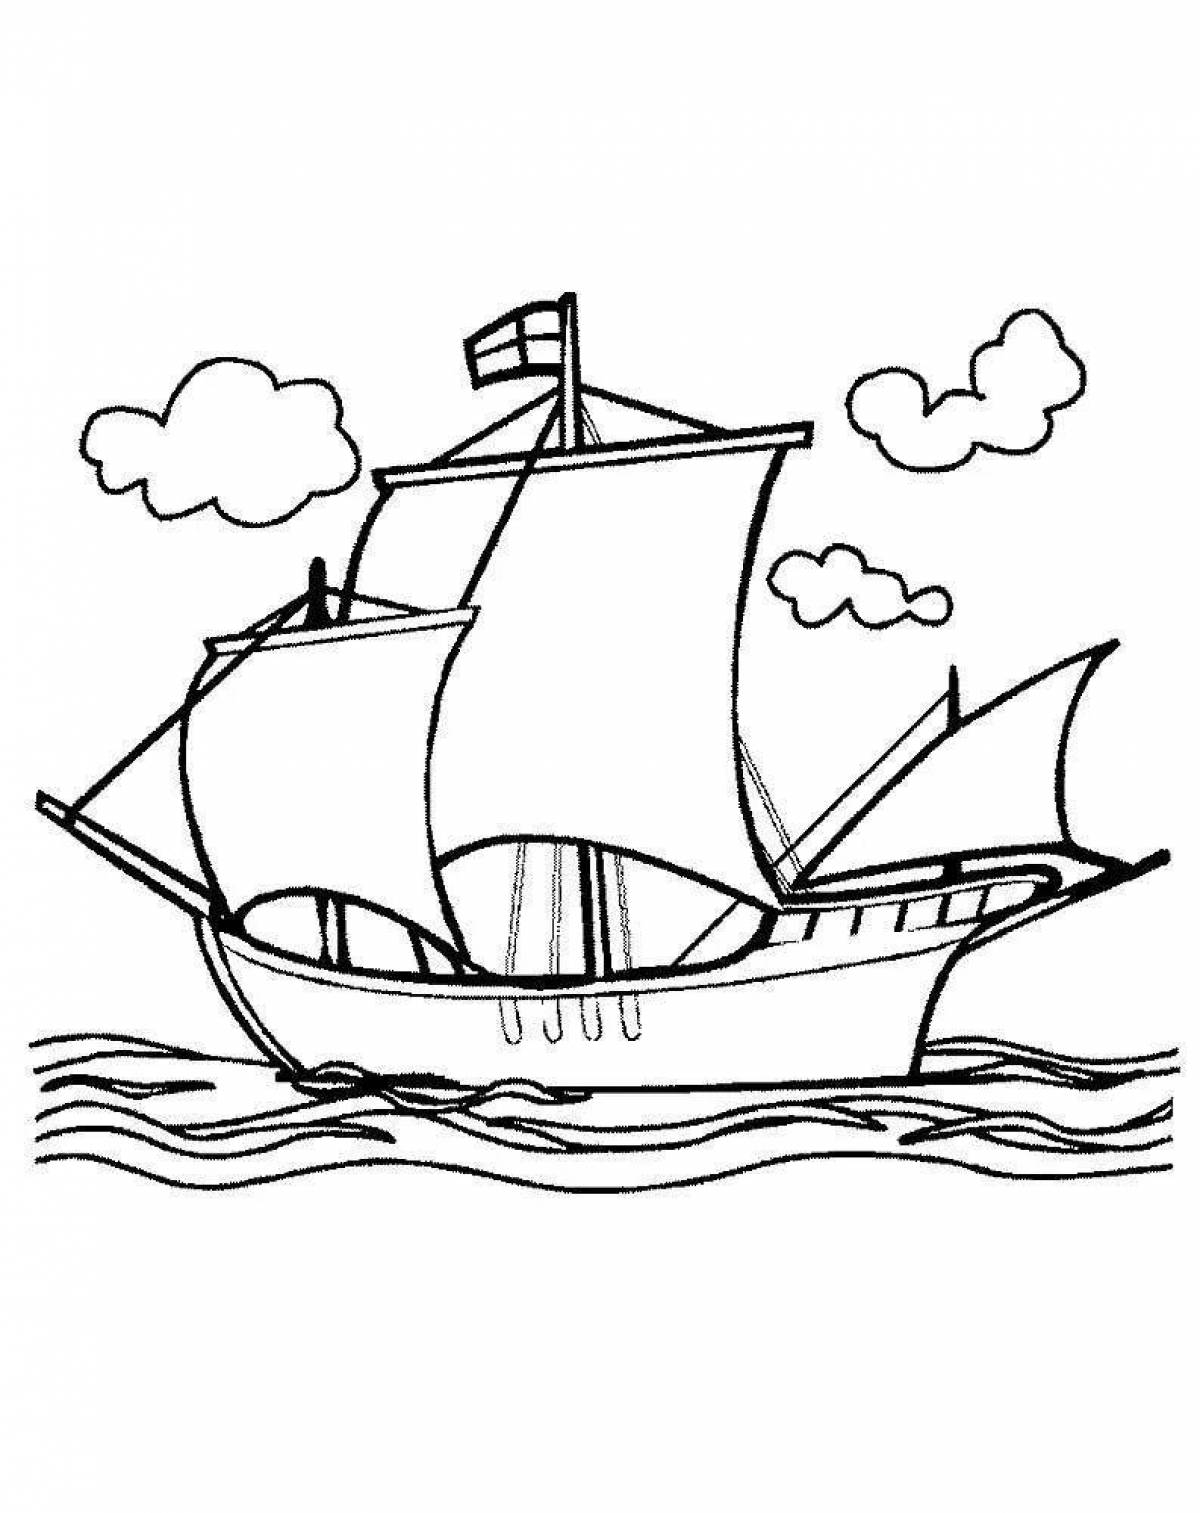 Coloring book shining sailboat for the little ones